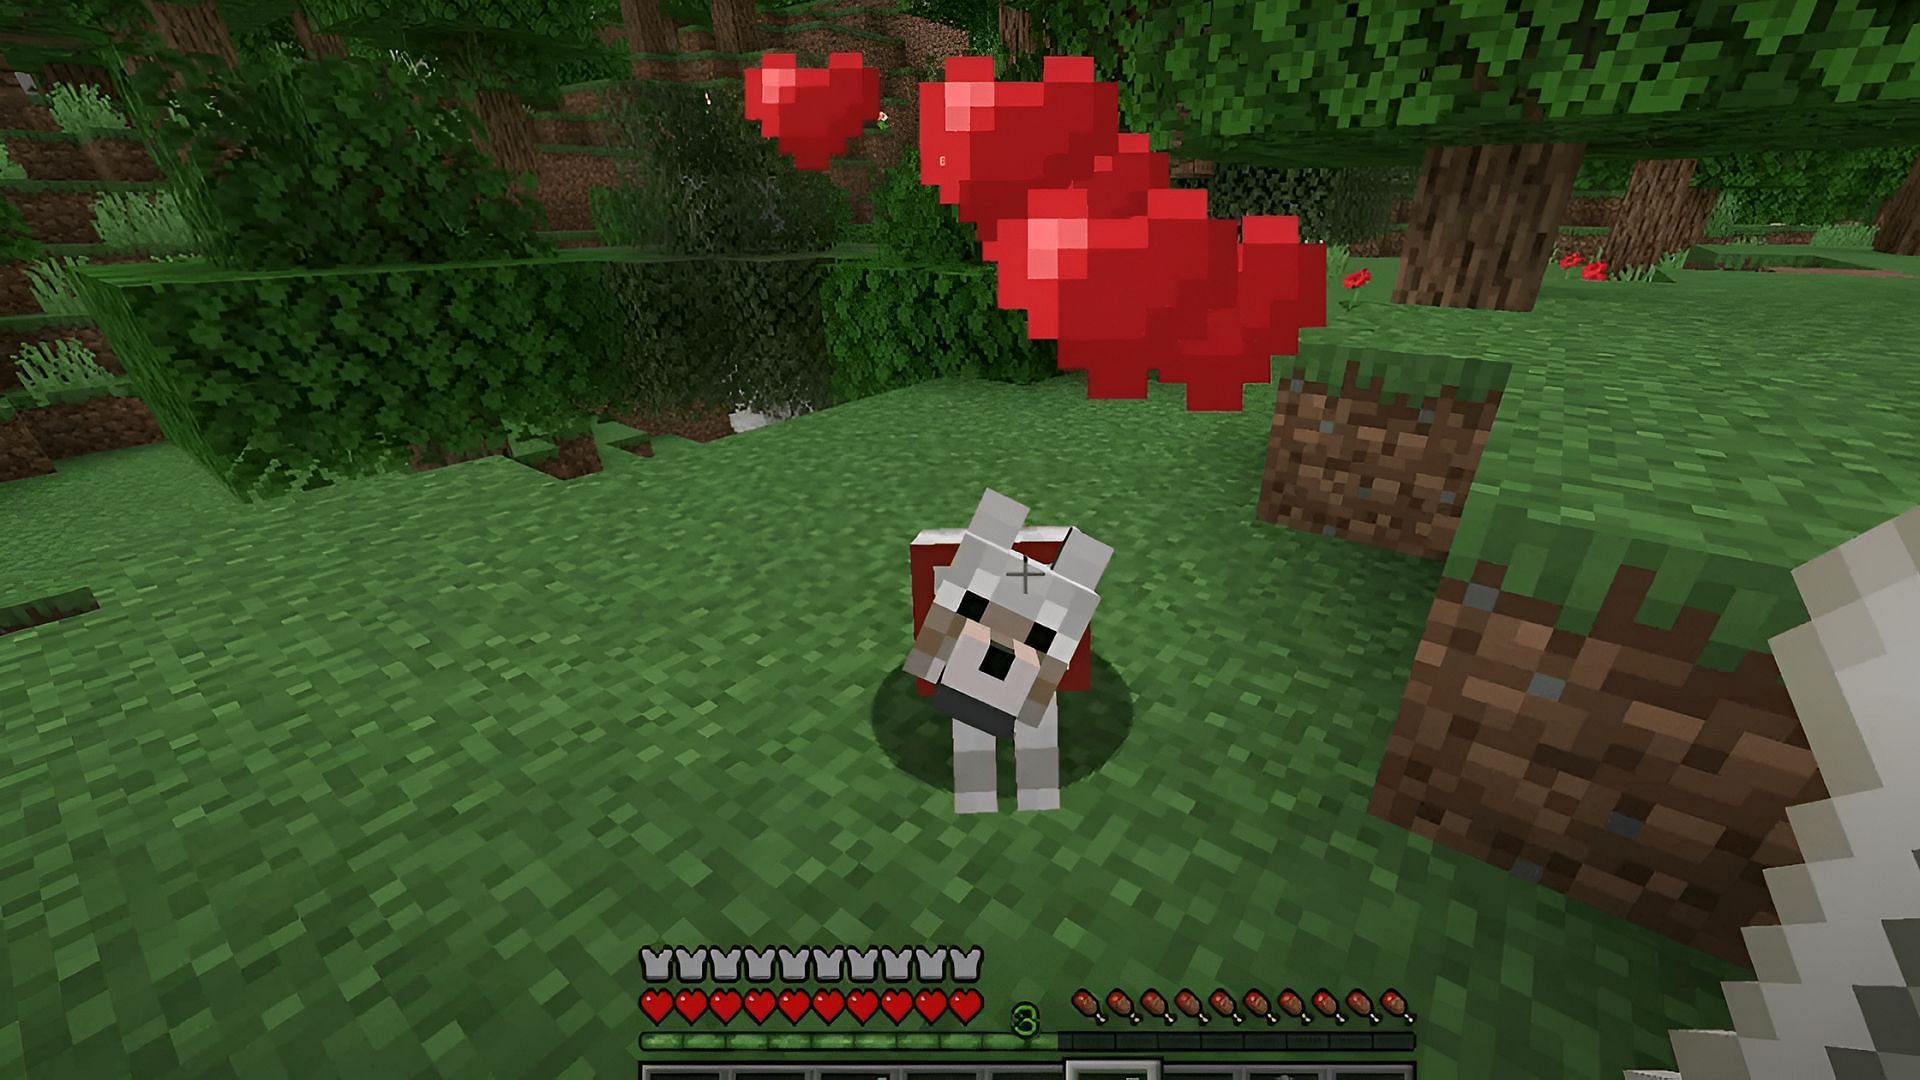 Wolves are one of the most frequently-tamed mobs in Minecraft (Image via Mojang)